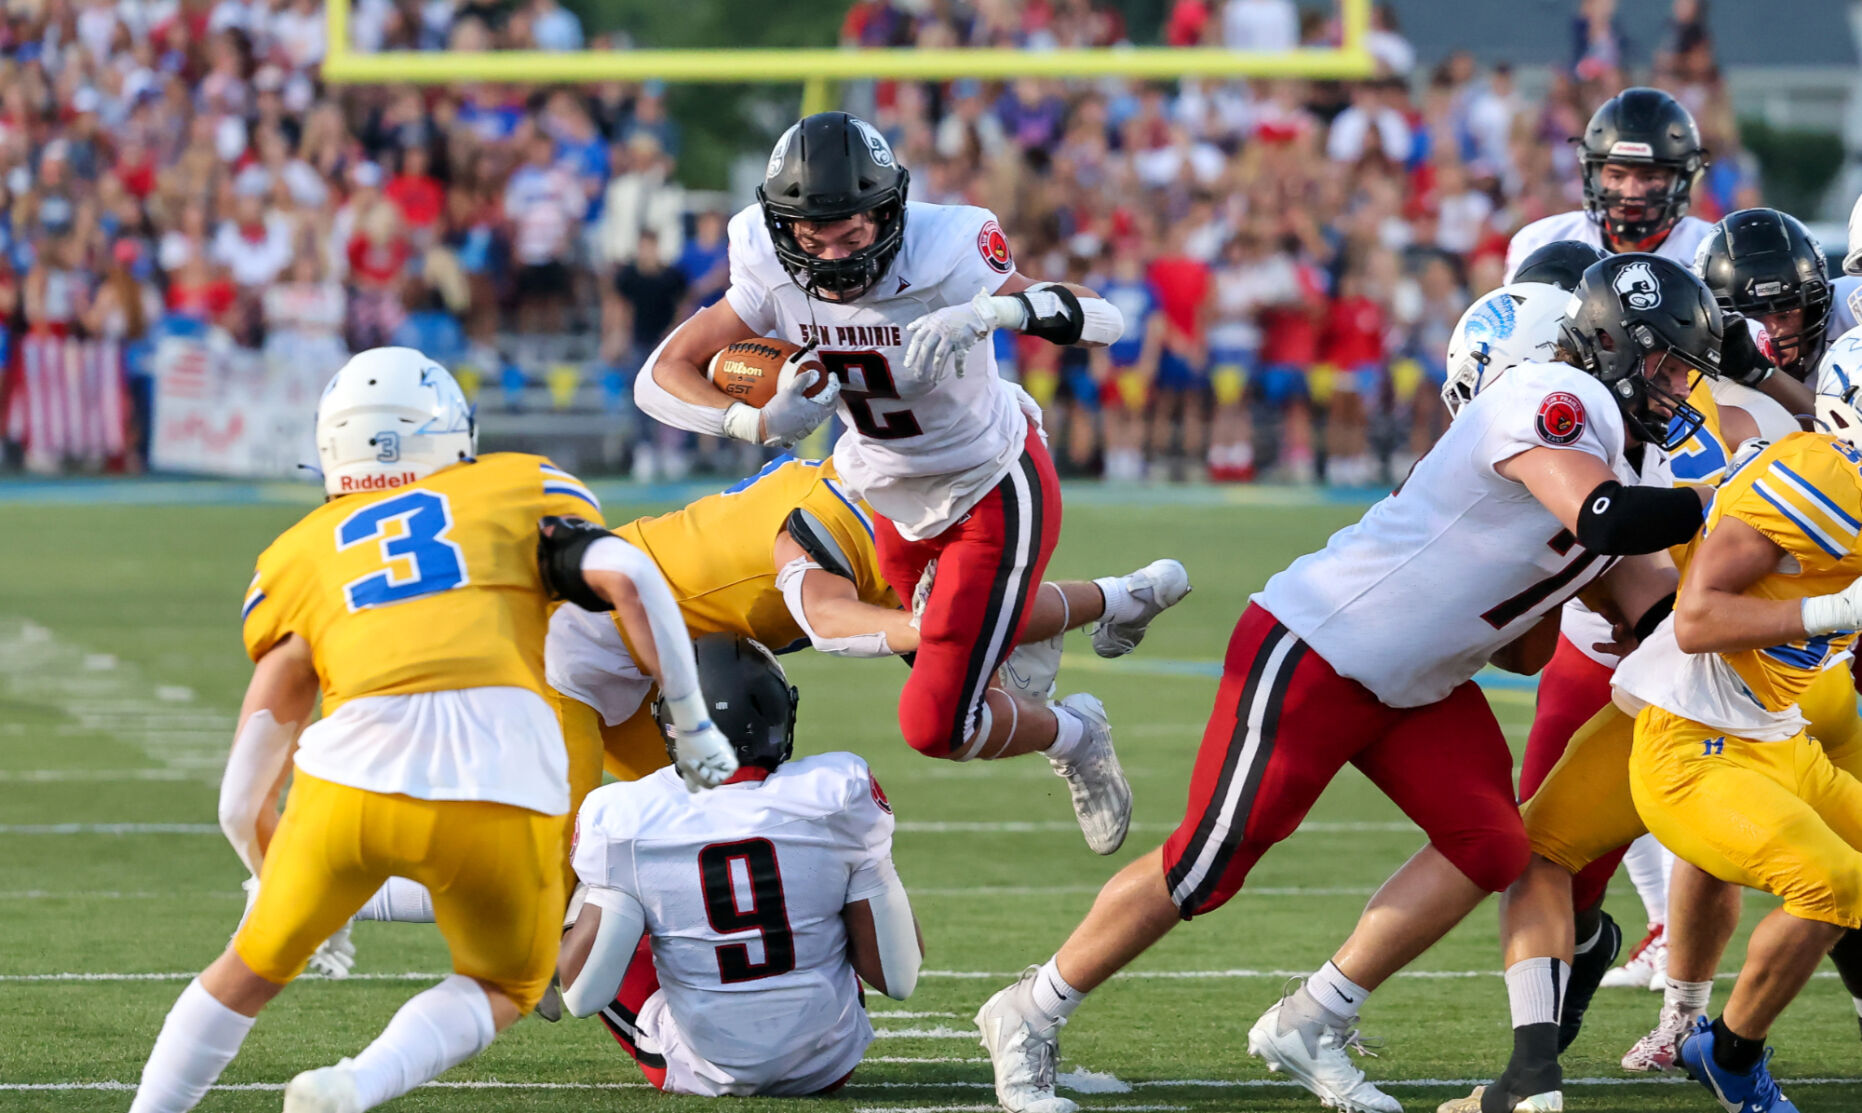 Sun Prairie East football outsized, outmatched at Mukwonago